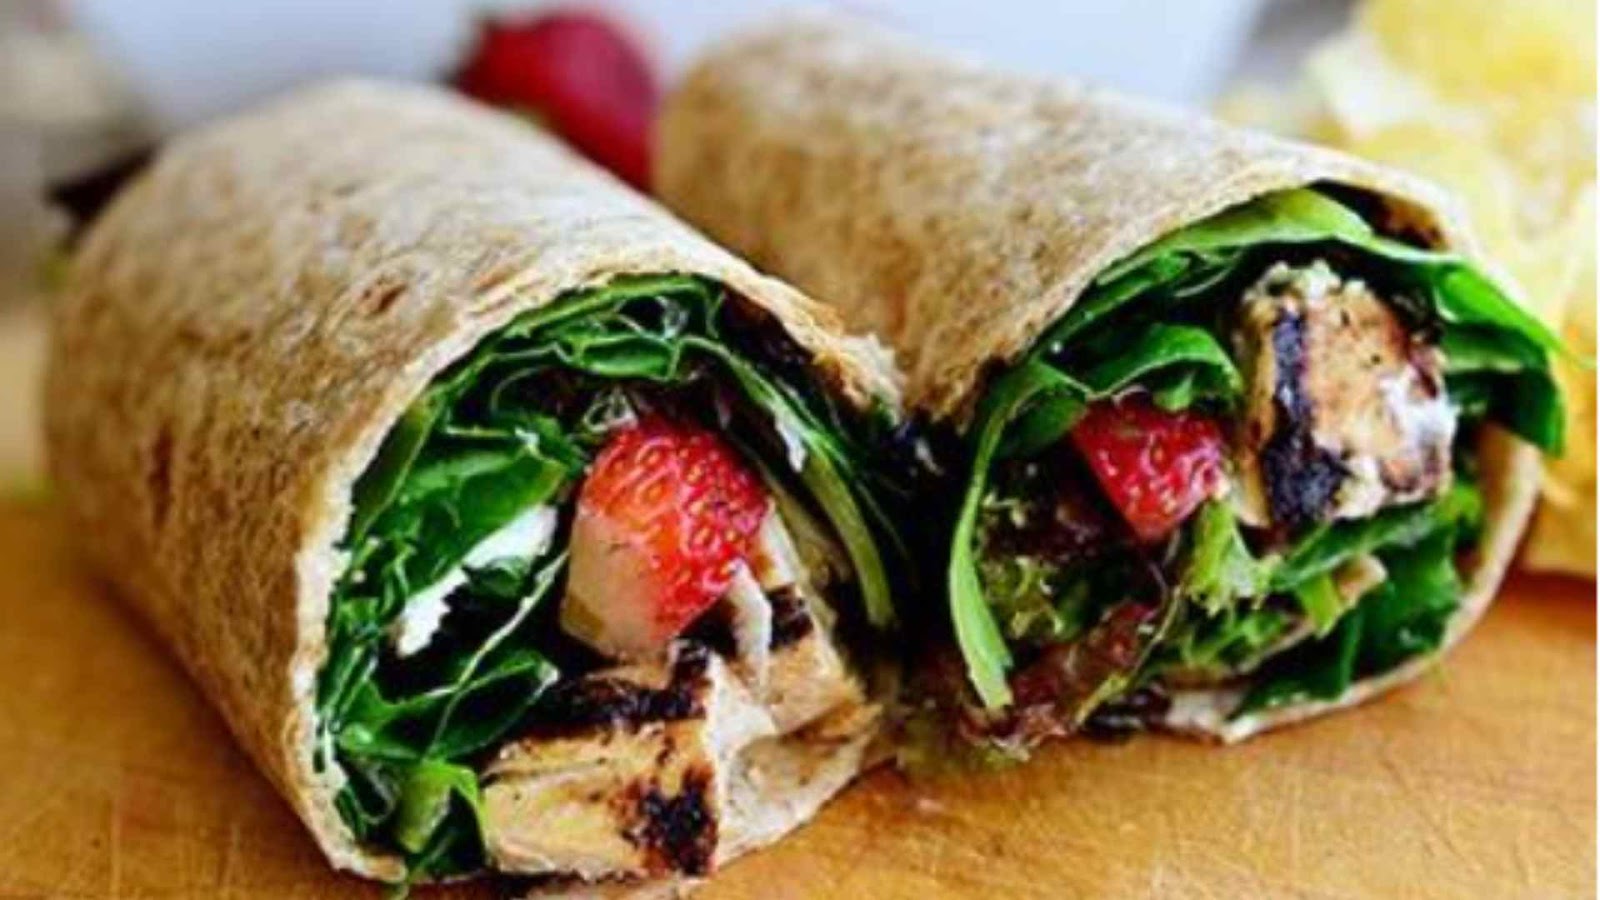 Grilled Chicken and Strawberry Salad Wrap: